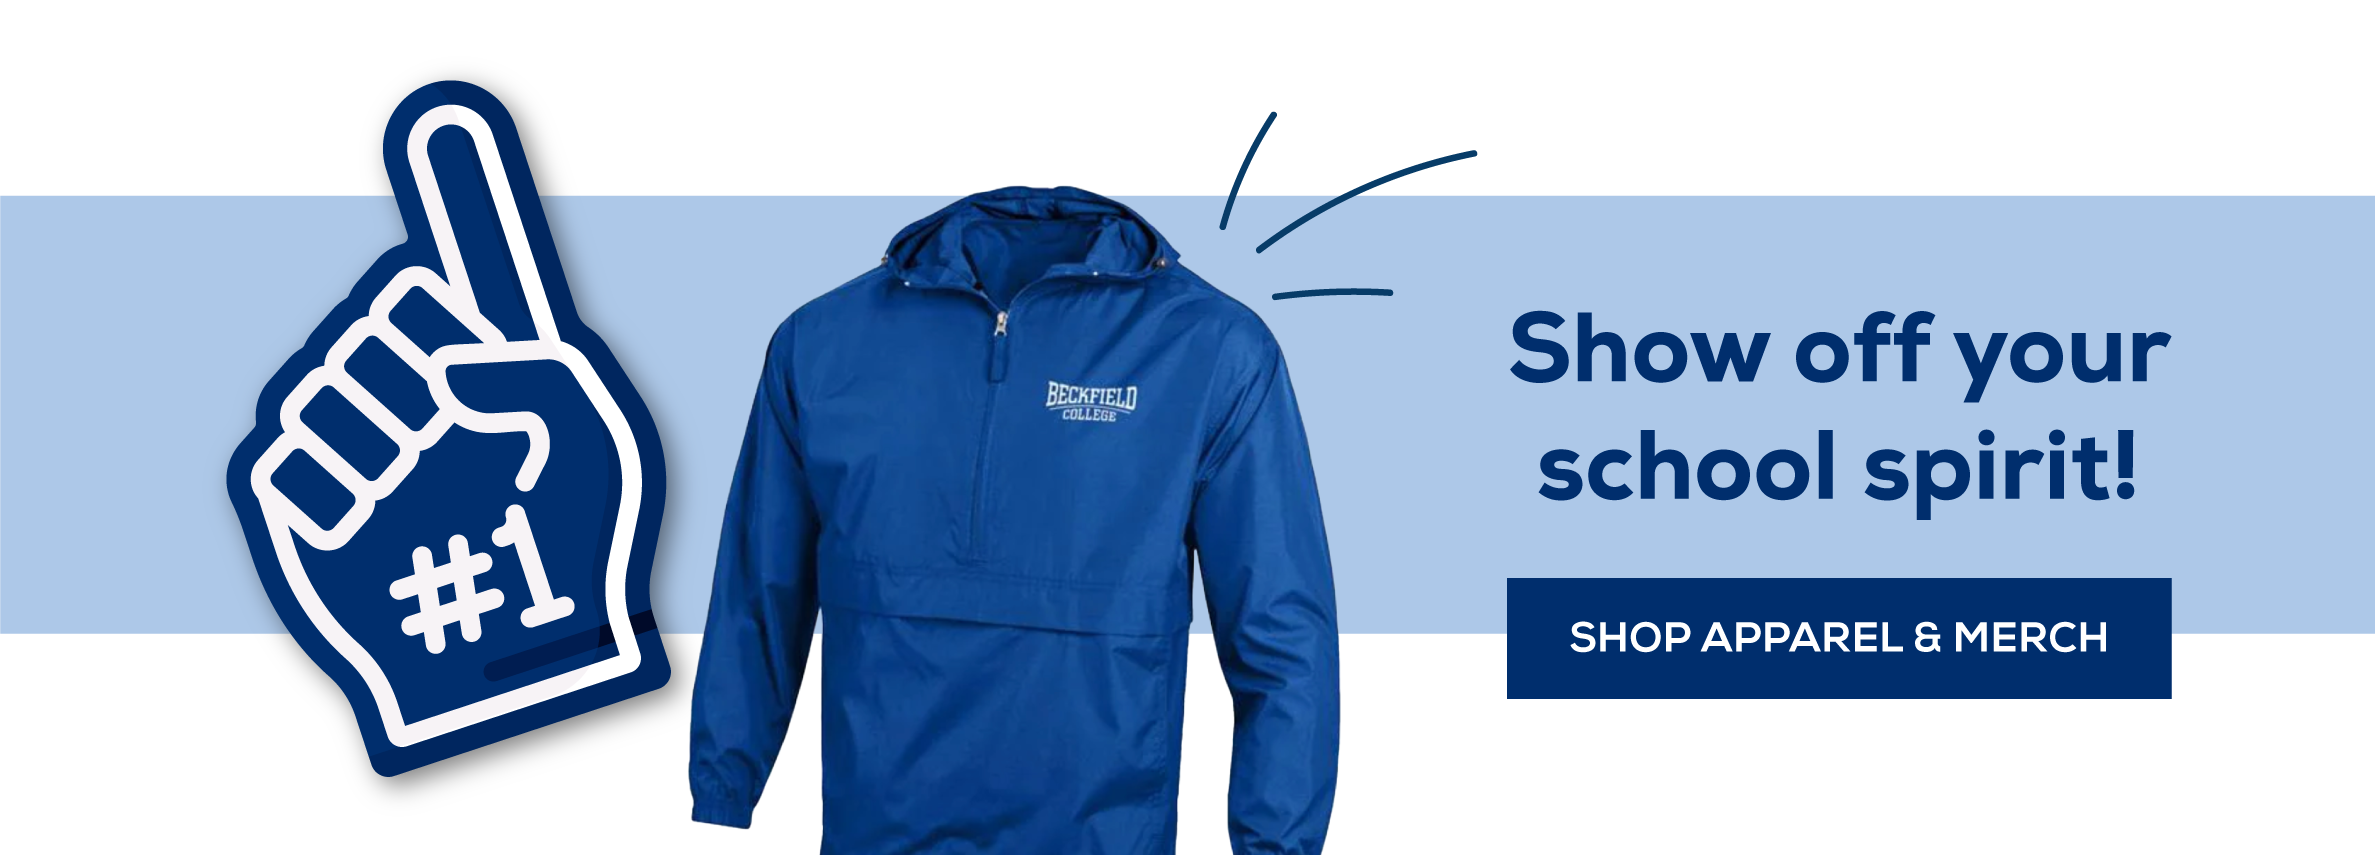 Show off your school spirit! shop apparel and merch